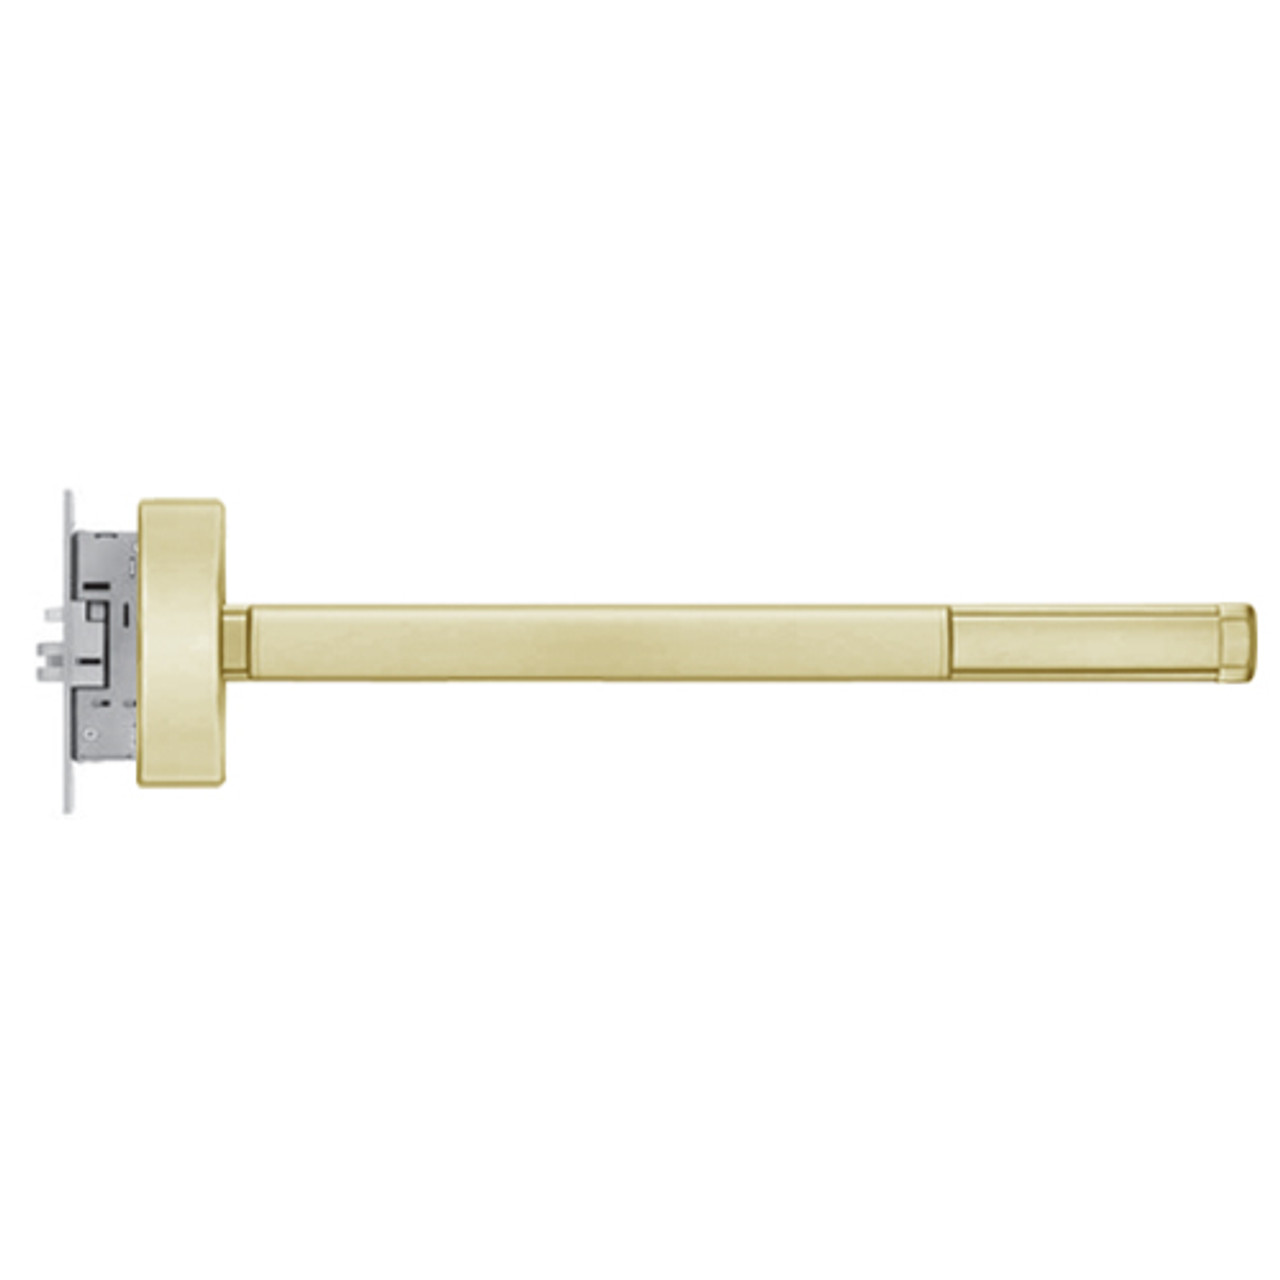 TSFL2301-RHR-606-36 PHI 2300 Series Fire Rated Apex Mortise Exit Device with Touchbar Monitoring Switch Prepped for Cover Plate in Satin Brass Finish